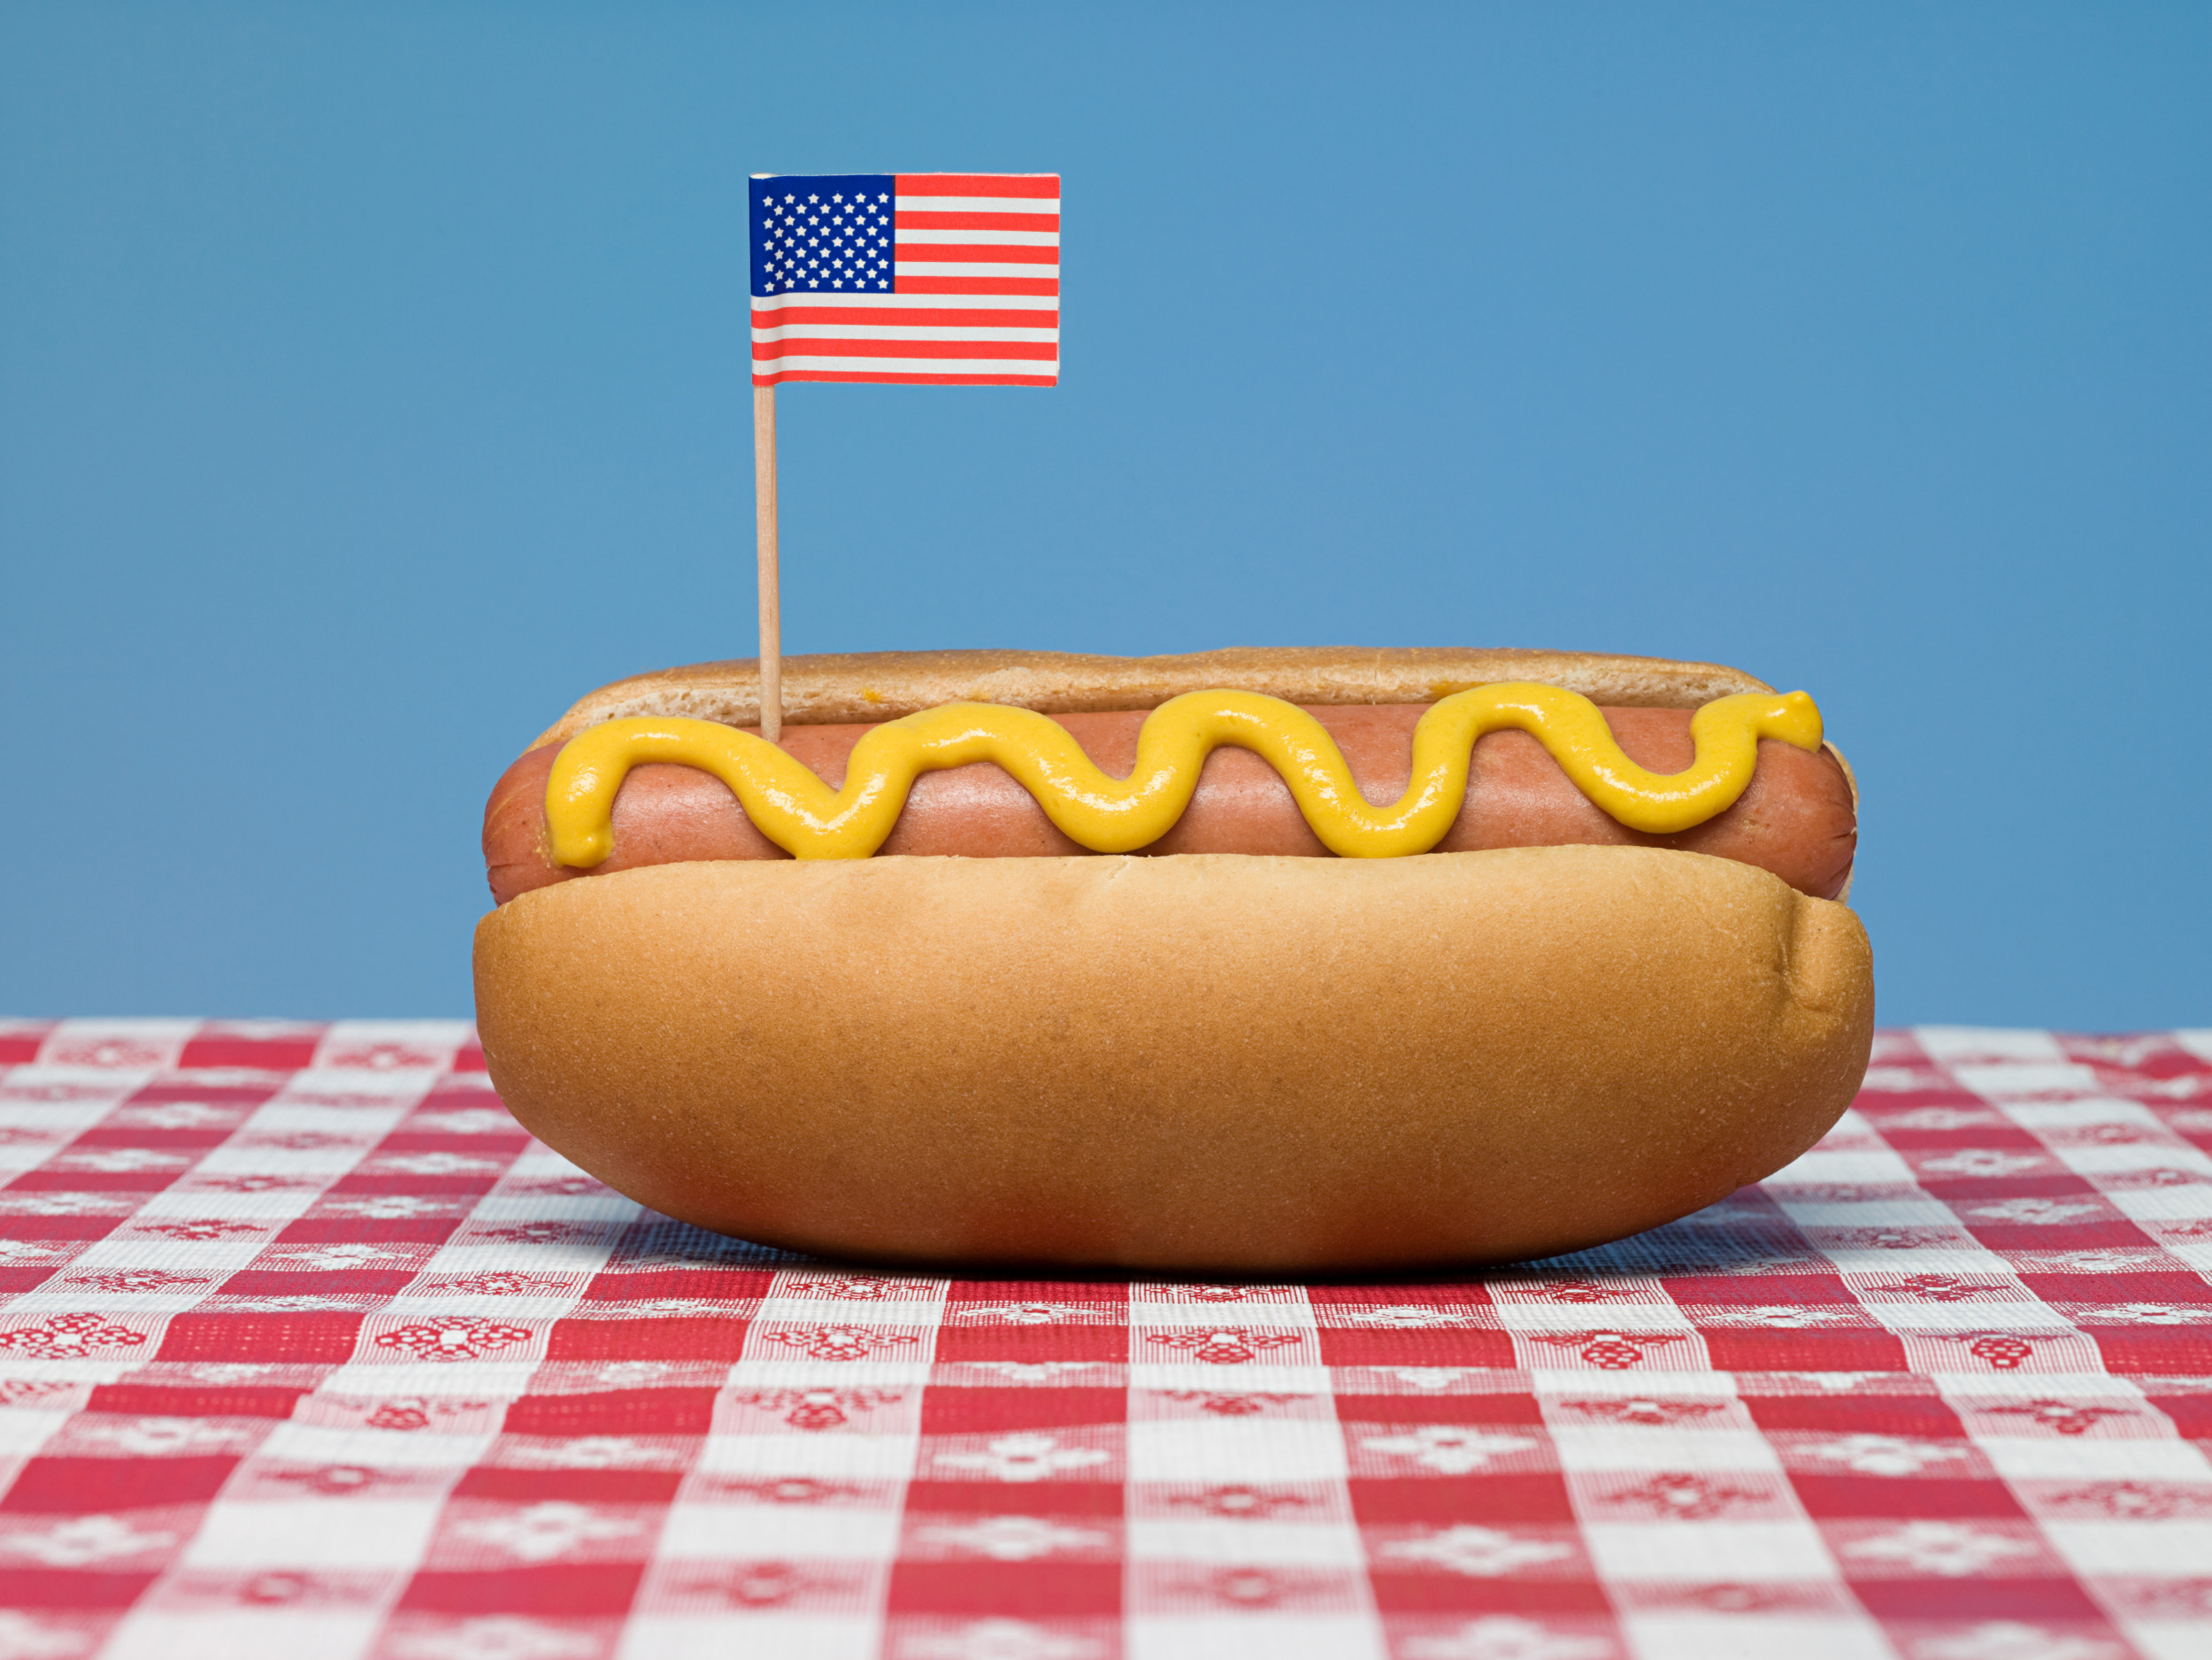 Mustard Shortage Could Spell 4th of July Disaster for Hot Dog Fans